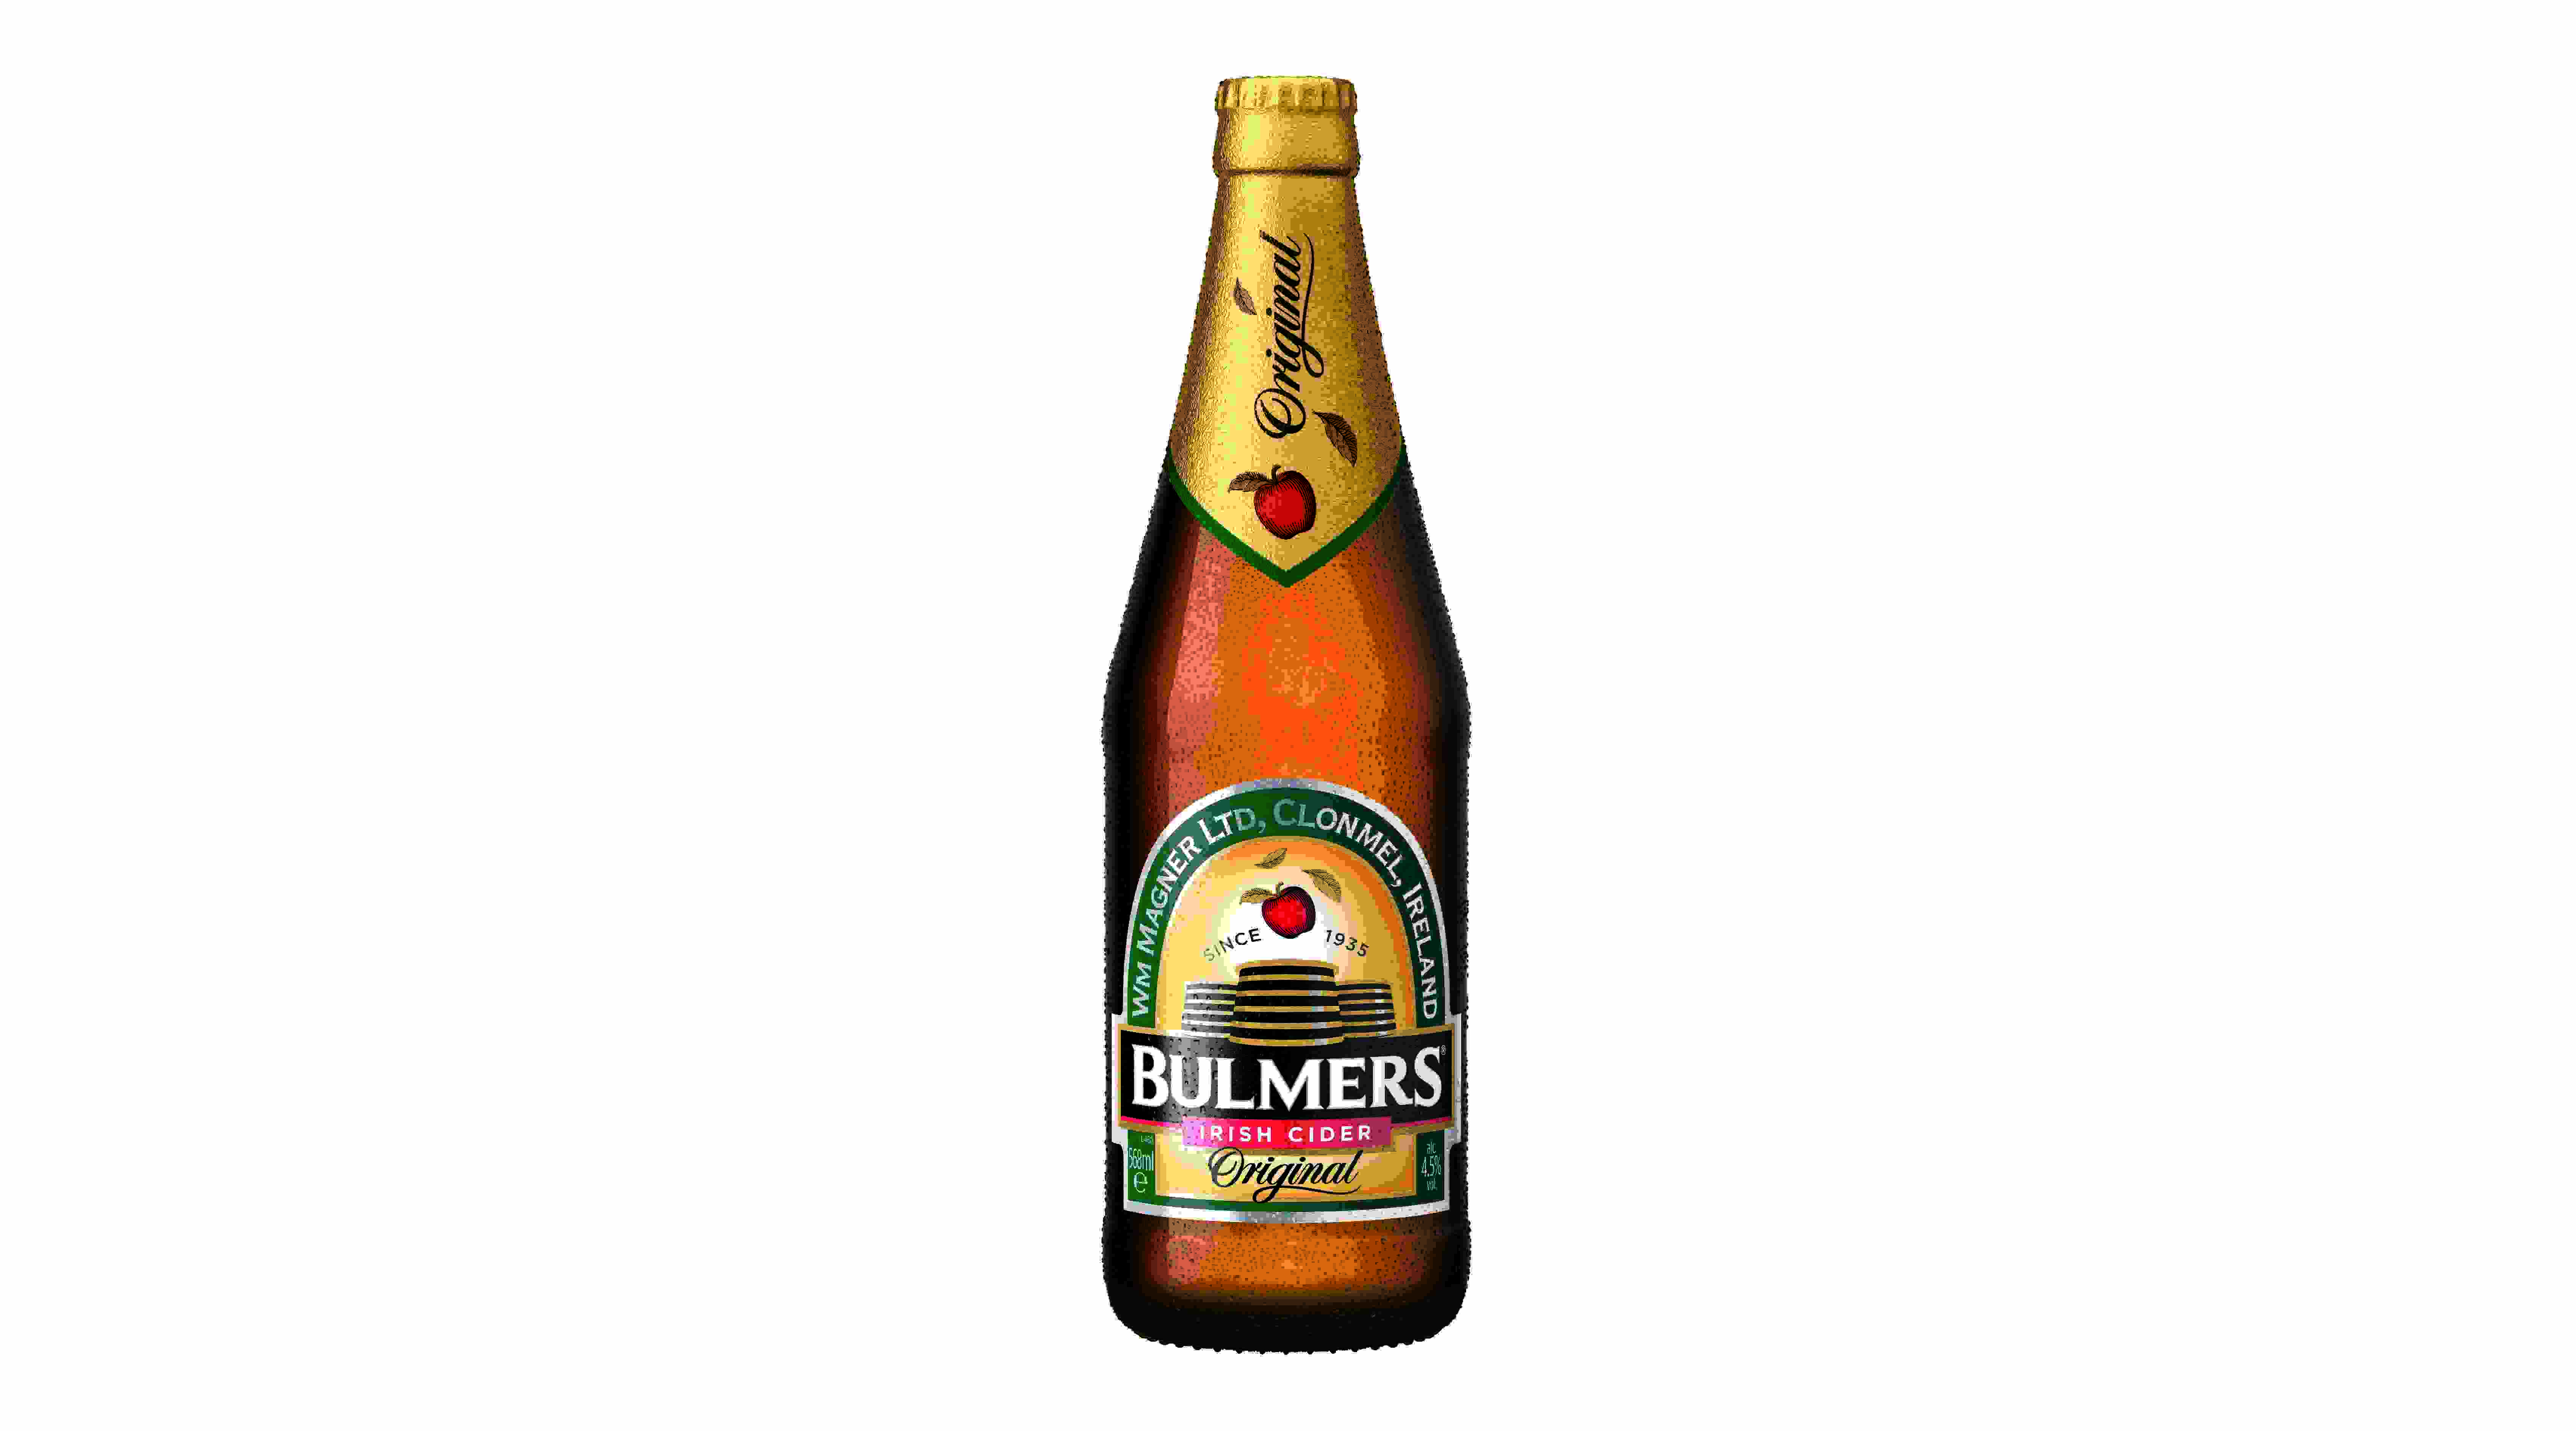 Bulmers' most dynamic and far-reaching experimental campaign ever has been designed to thank consumers for their loyal support.